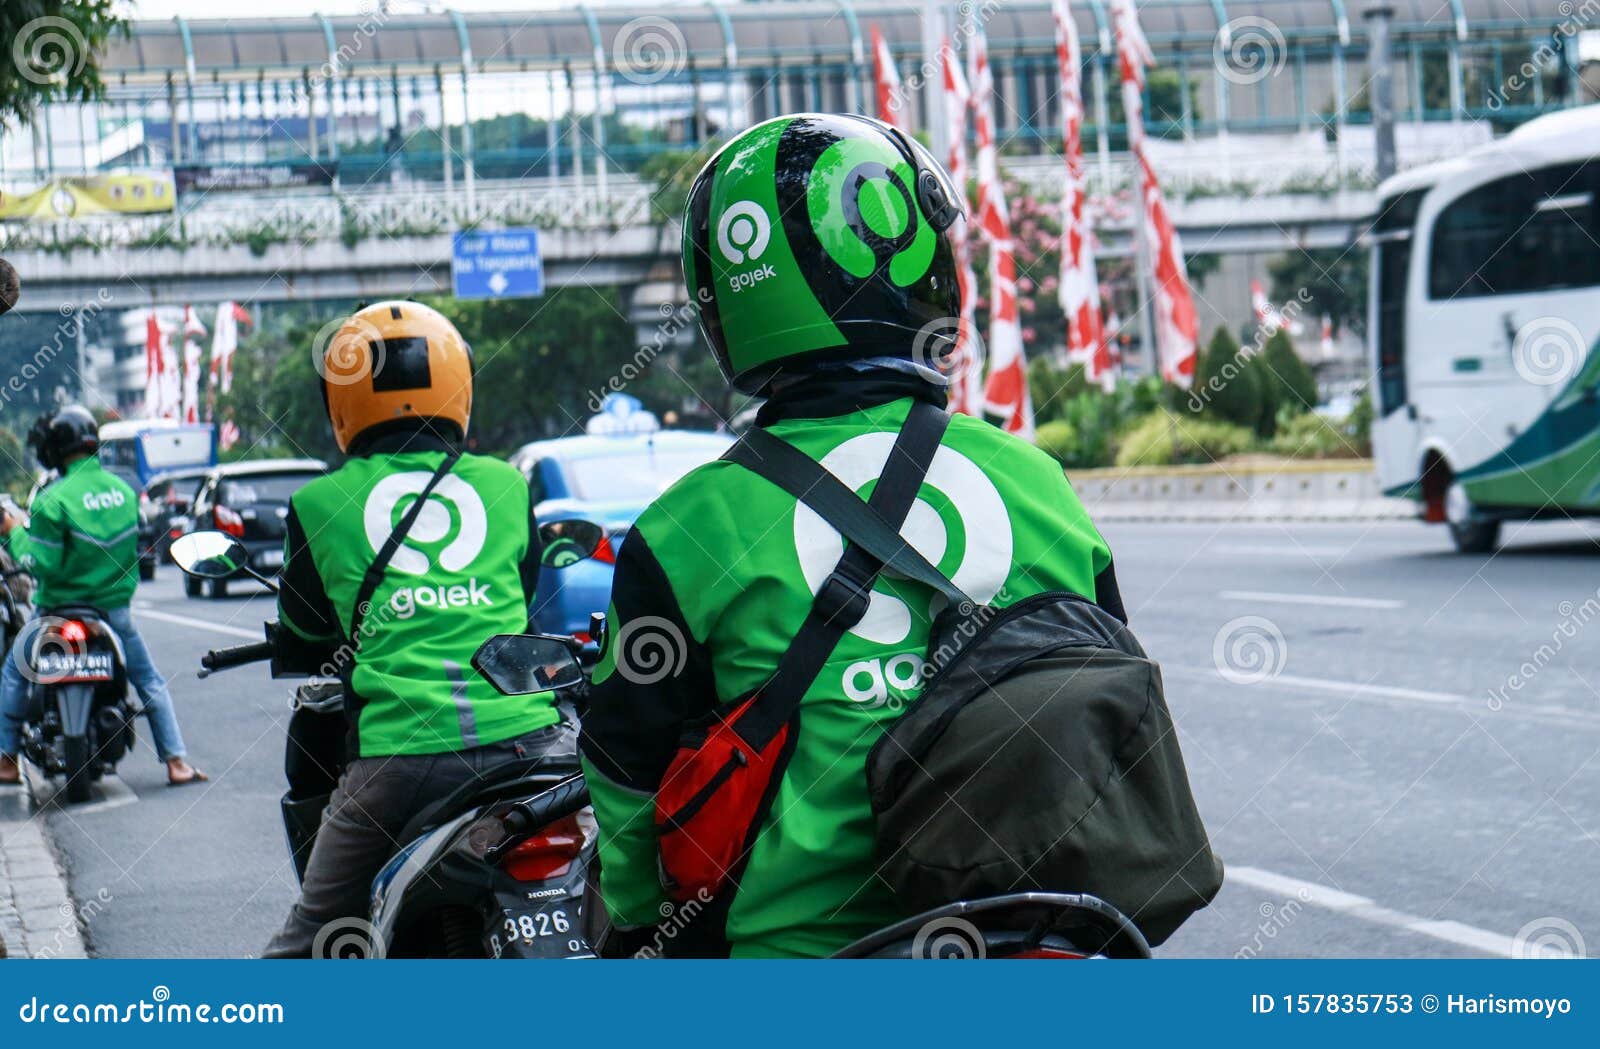  Gojek  Motorcycle  Taxi editorial stock photo Image of 